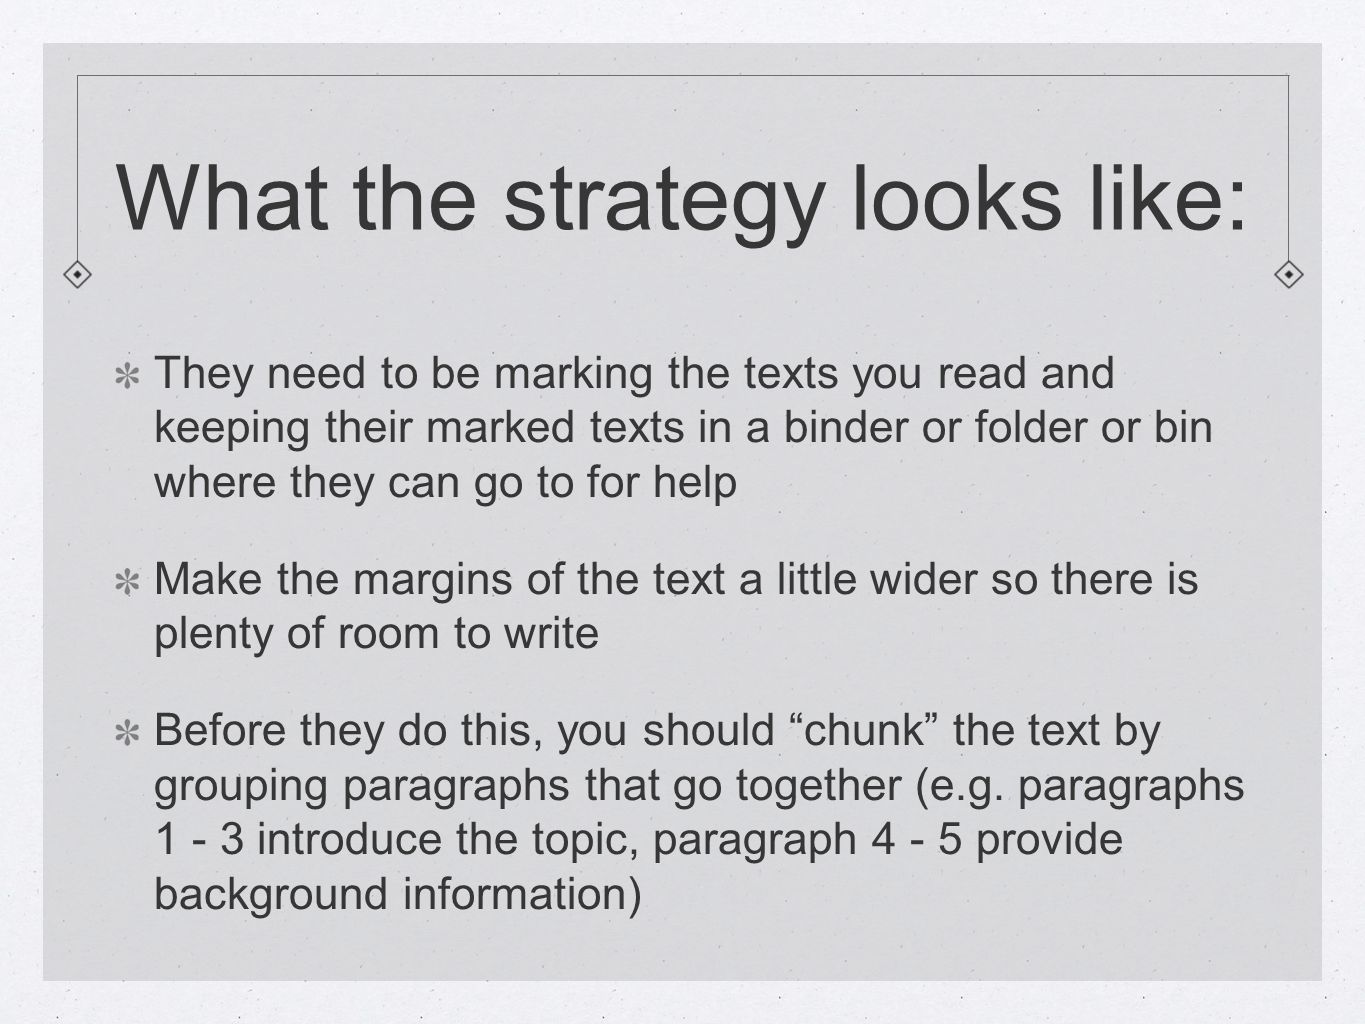 What the strategy looks like: They need to be marking the texts you read and keeping their marked texts in a binder or folder or bin where they can go to for help Make the margins of the text a little wider so there is plenty of room to write Before they do this, you should chunk the text by grouping paragraphs that go together (e.g.